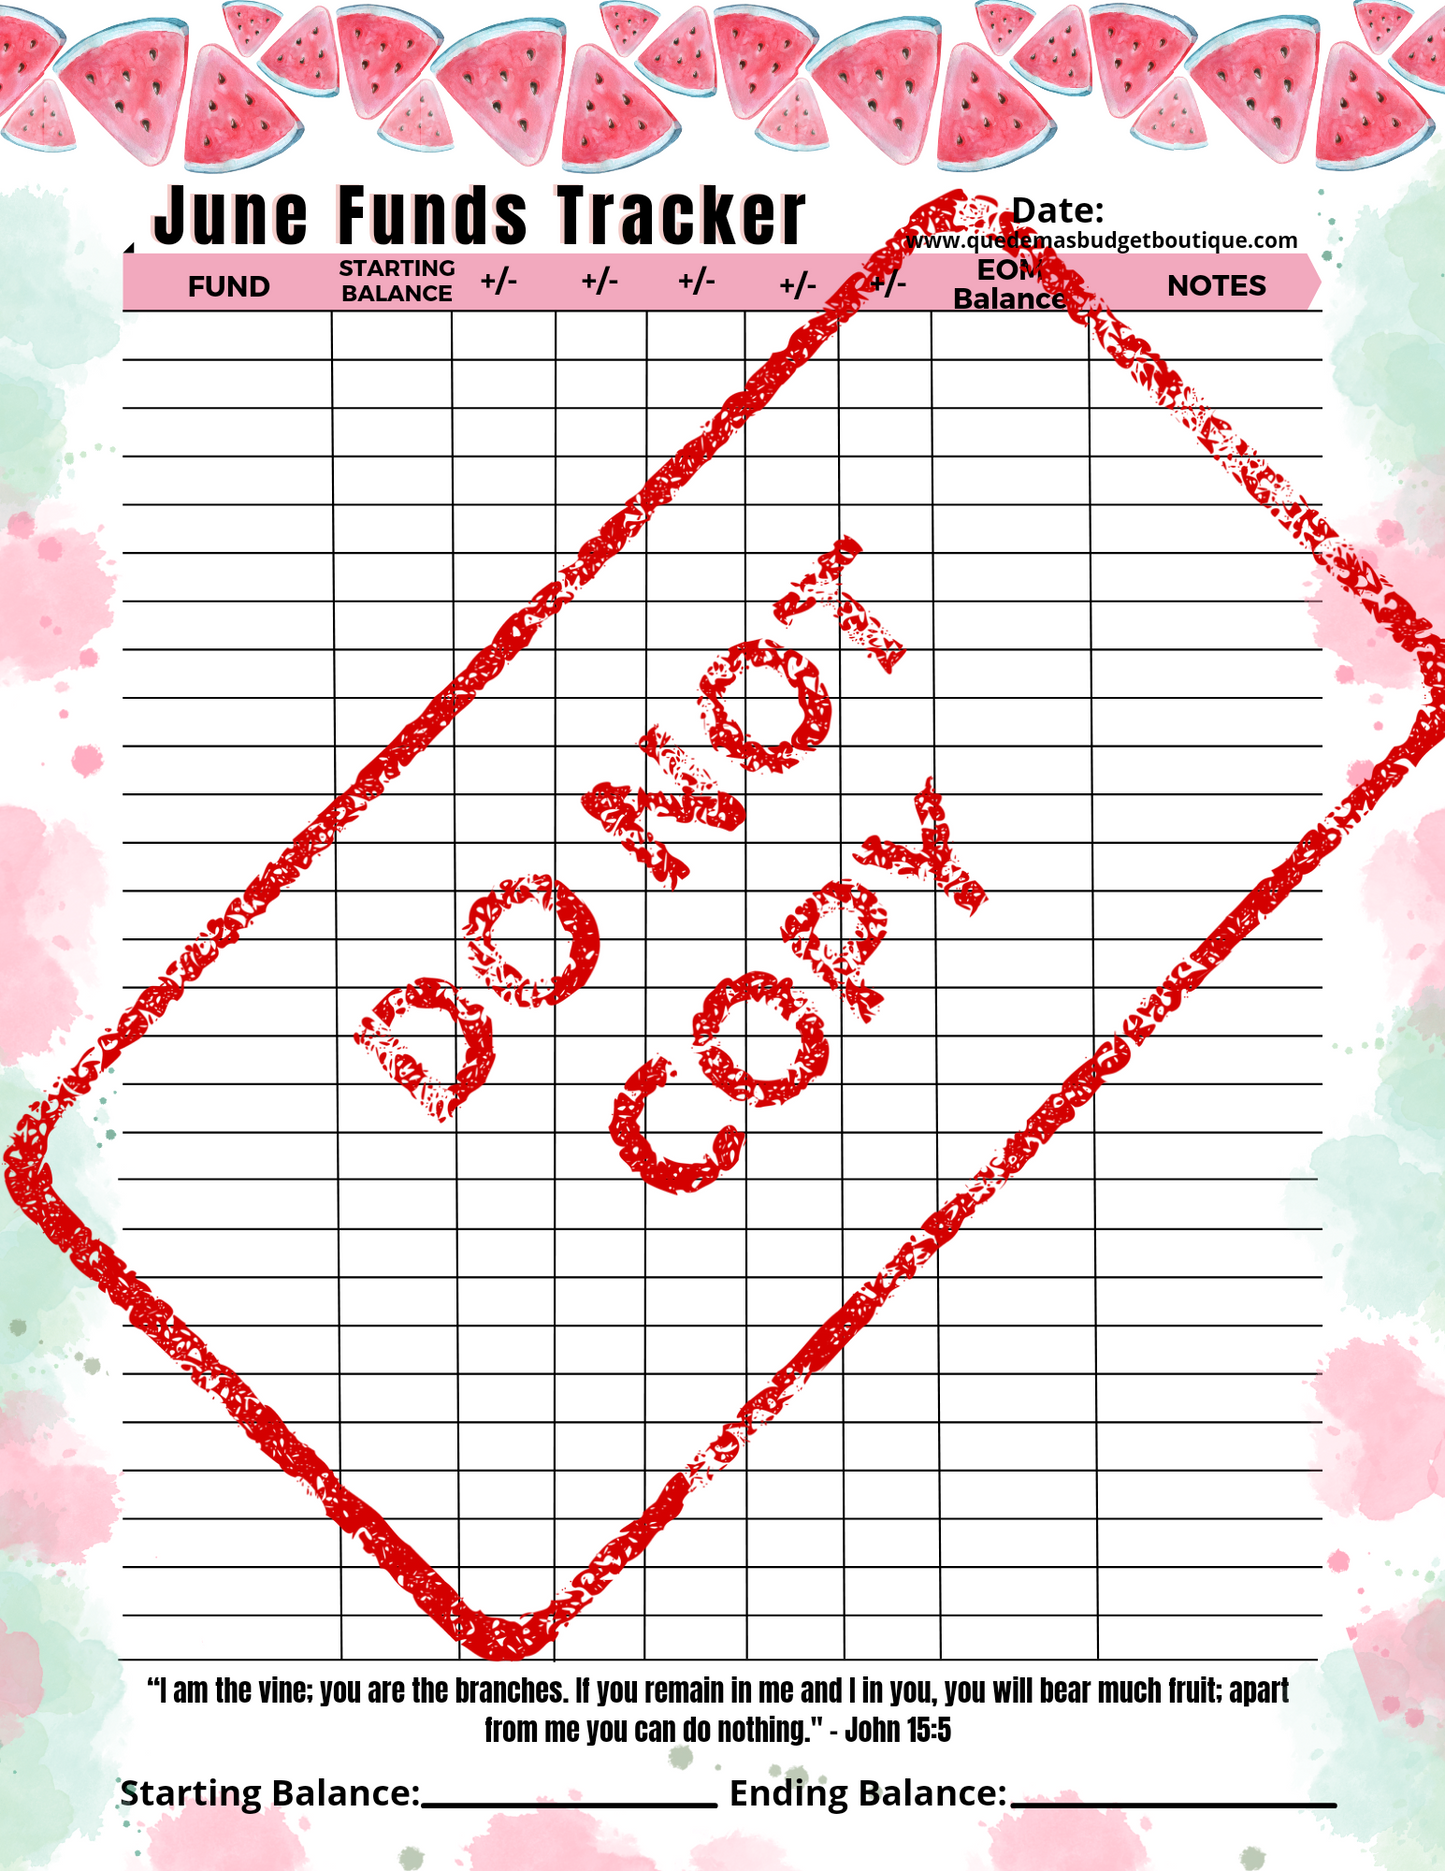 Watermelon Sinking Fund Tracker Tracker! JUNE Option Available! PDF Printable!  8.5 x 11